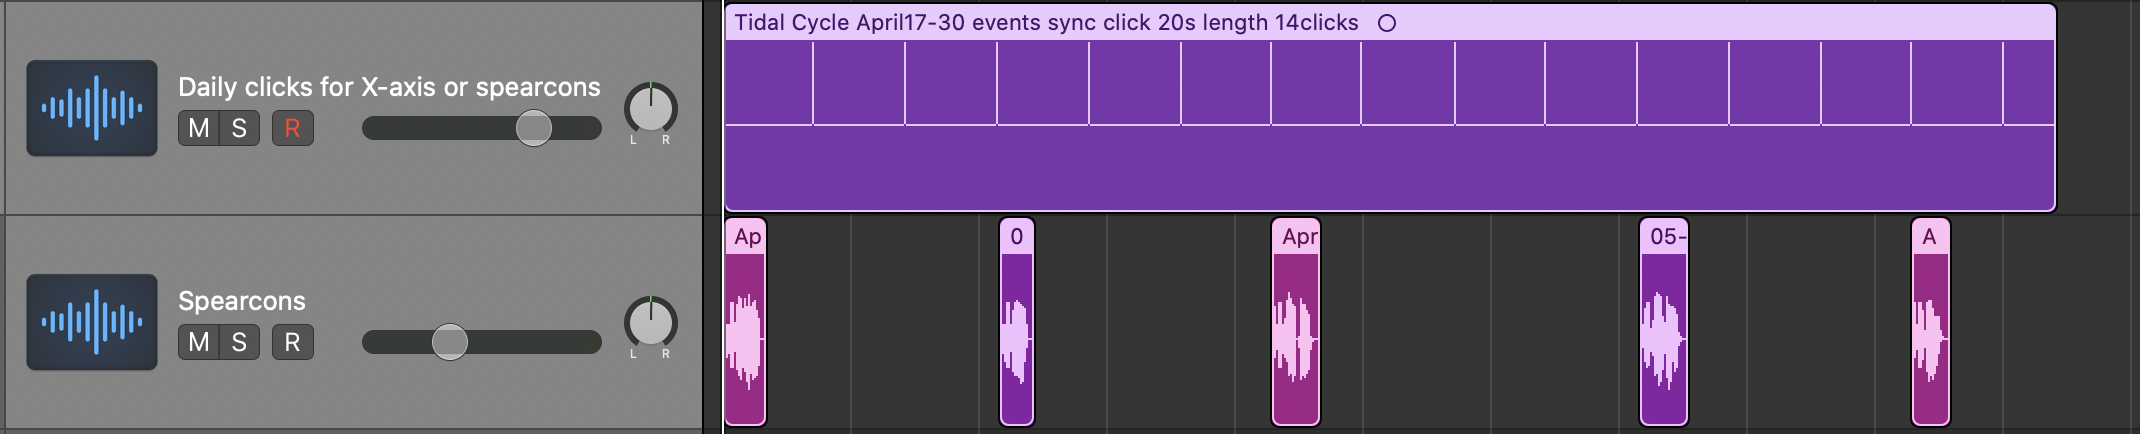 The image shows two audio tracks in Logic. The top track is a sonification click track with fourteen equally-spaced clicks across twenty seconds. The bottom track contains several audio regions aligned to the clicks in the top track.